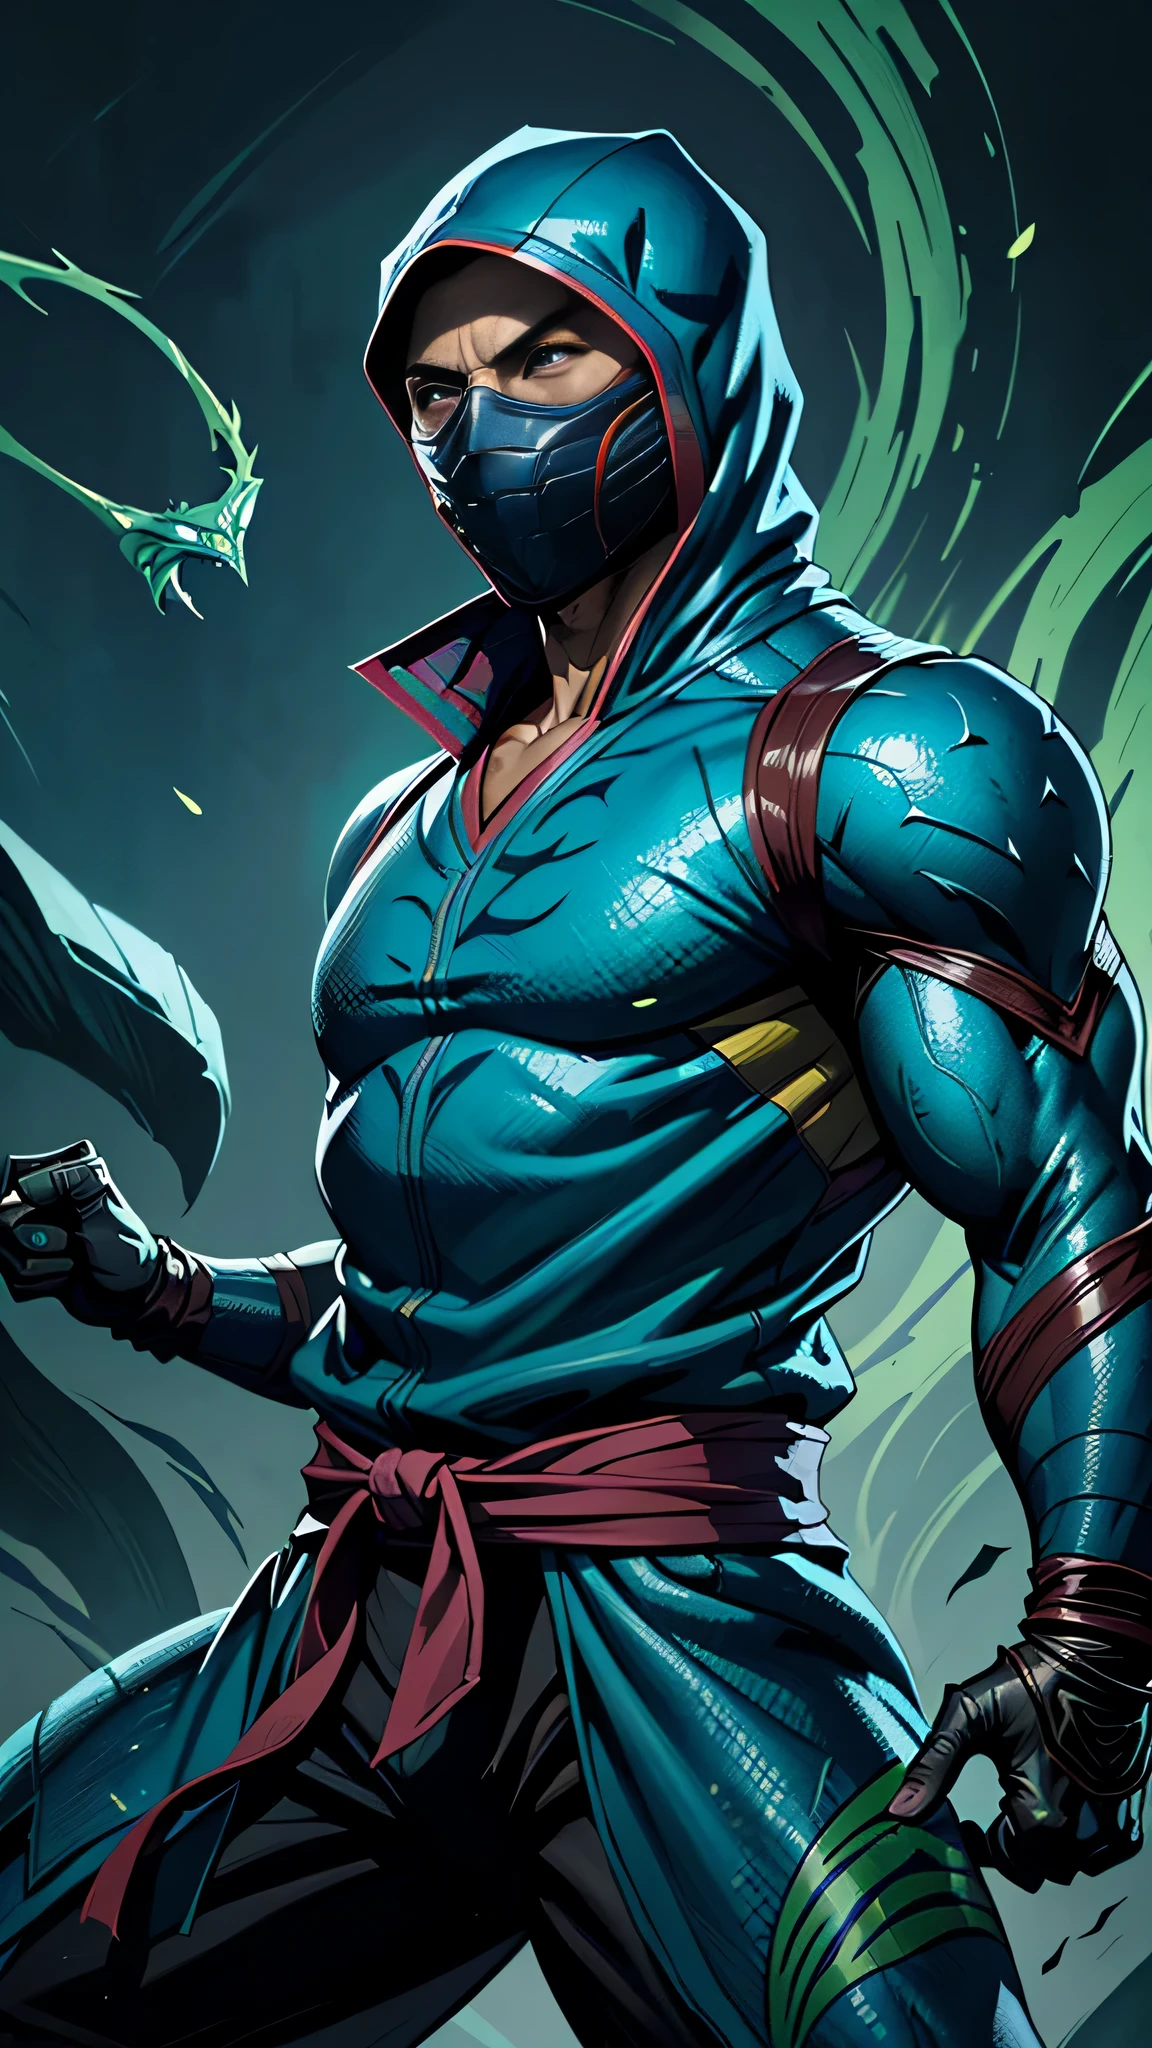 ((Daniel Wu)) as Chameleon from Mortal Kombat, (1boy), fighting standing, turquoise ninja outfit, (with reptilian motifs), (ninja mask covering his lower face), intricate, high detail, sharp focus, dramatic, photorealistic painting art by greg rutkowski